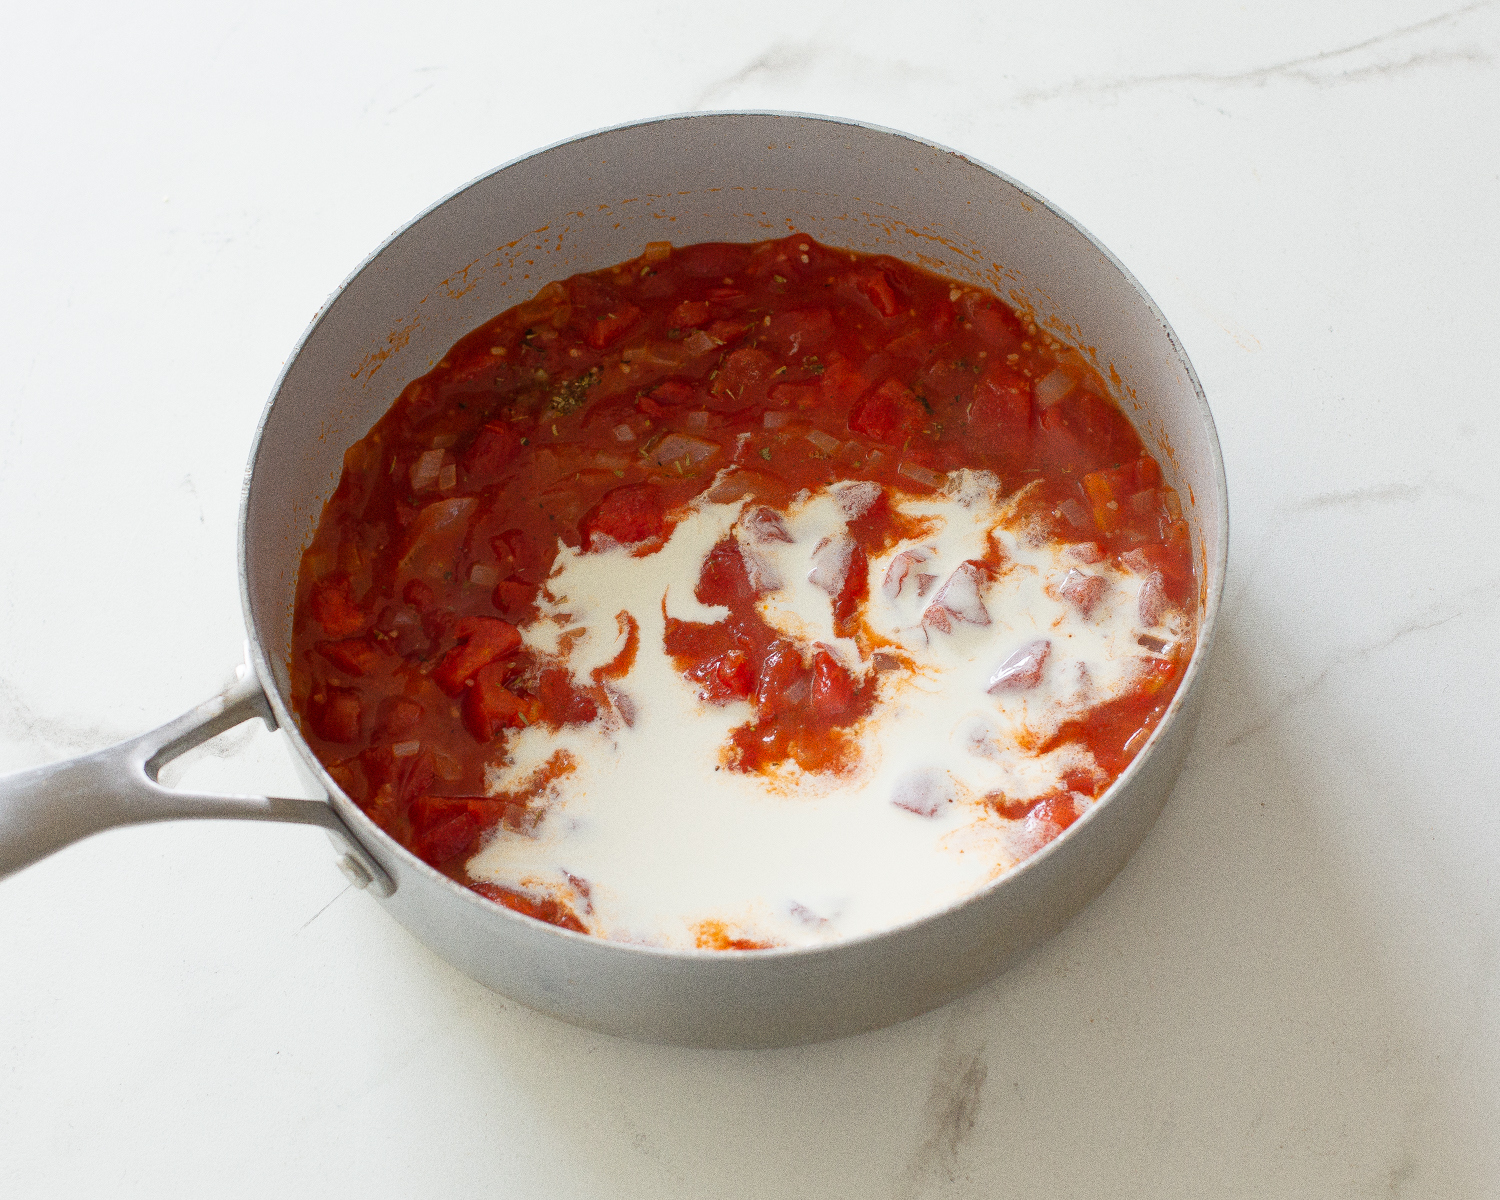 diced tomatoes with cream